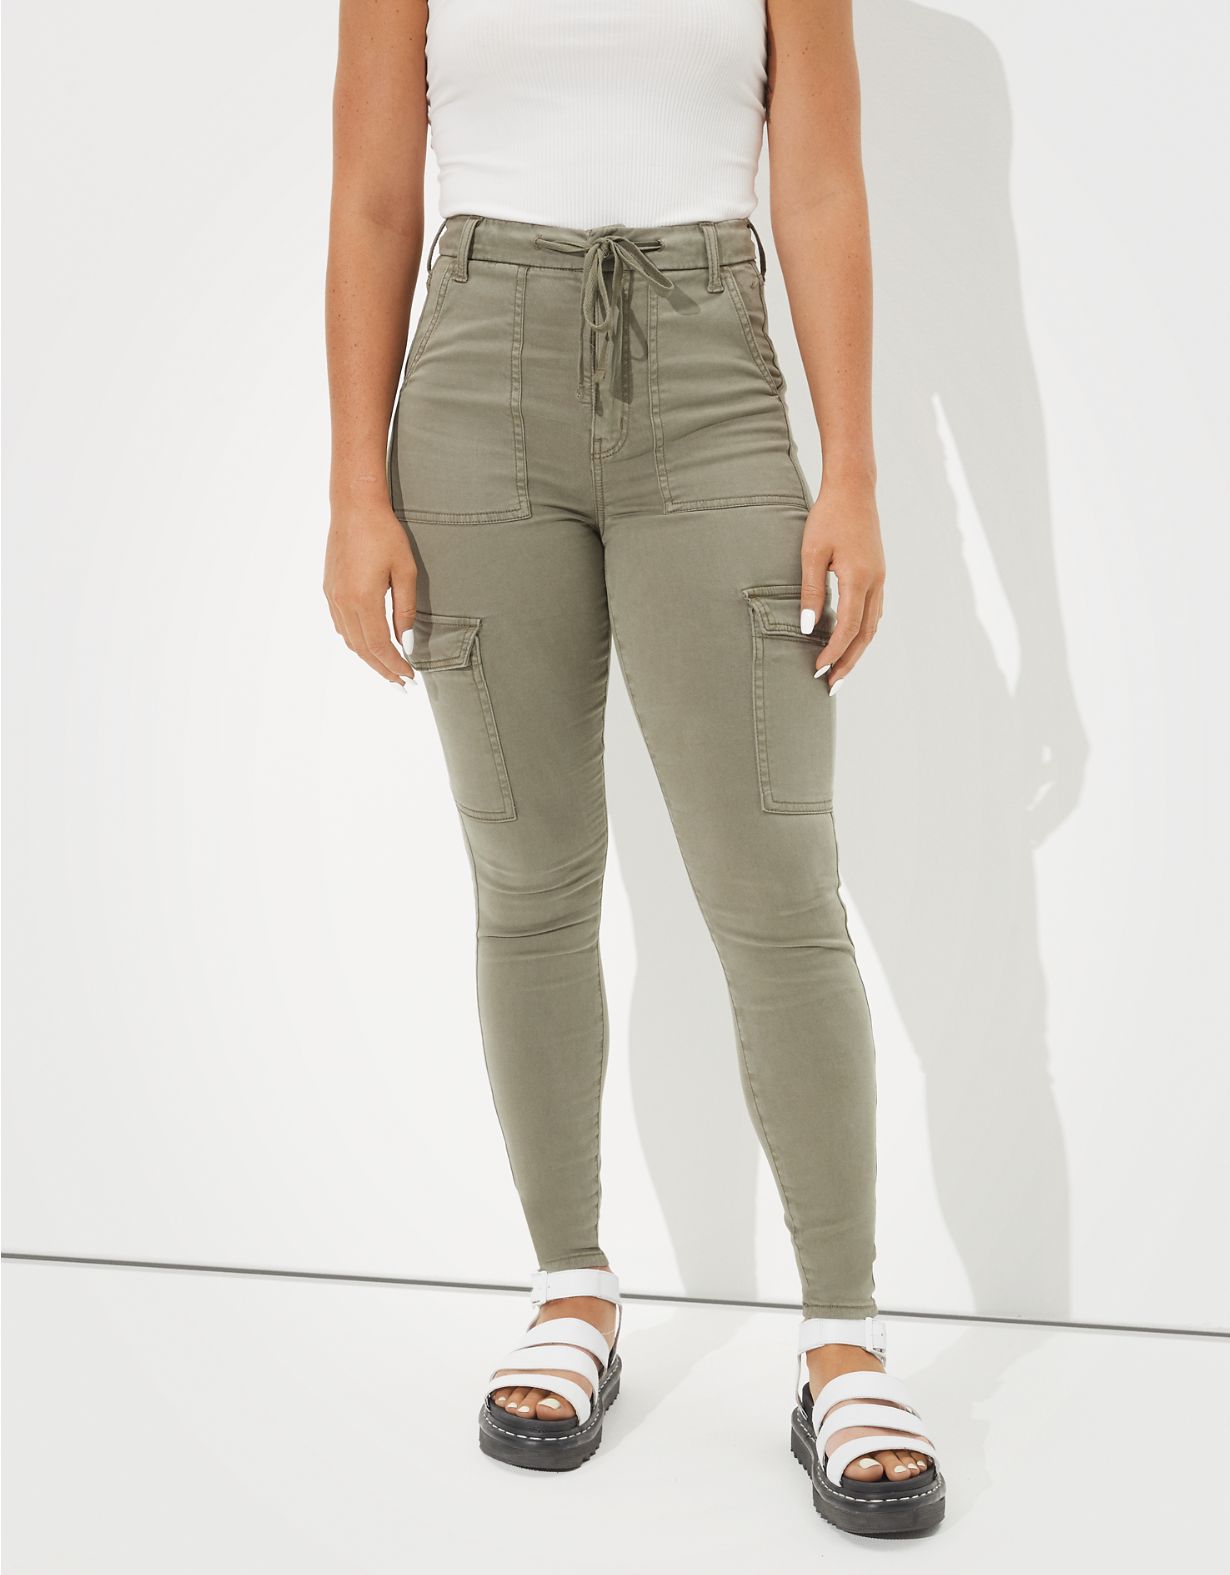 AE Curvy Super High-Waisted Jegging